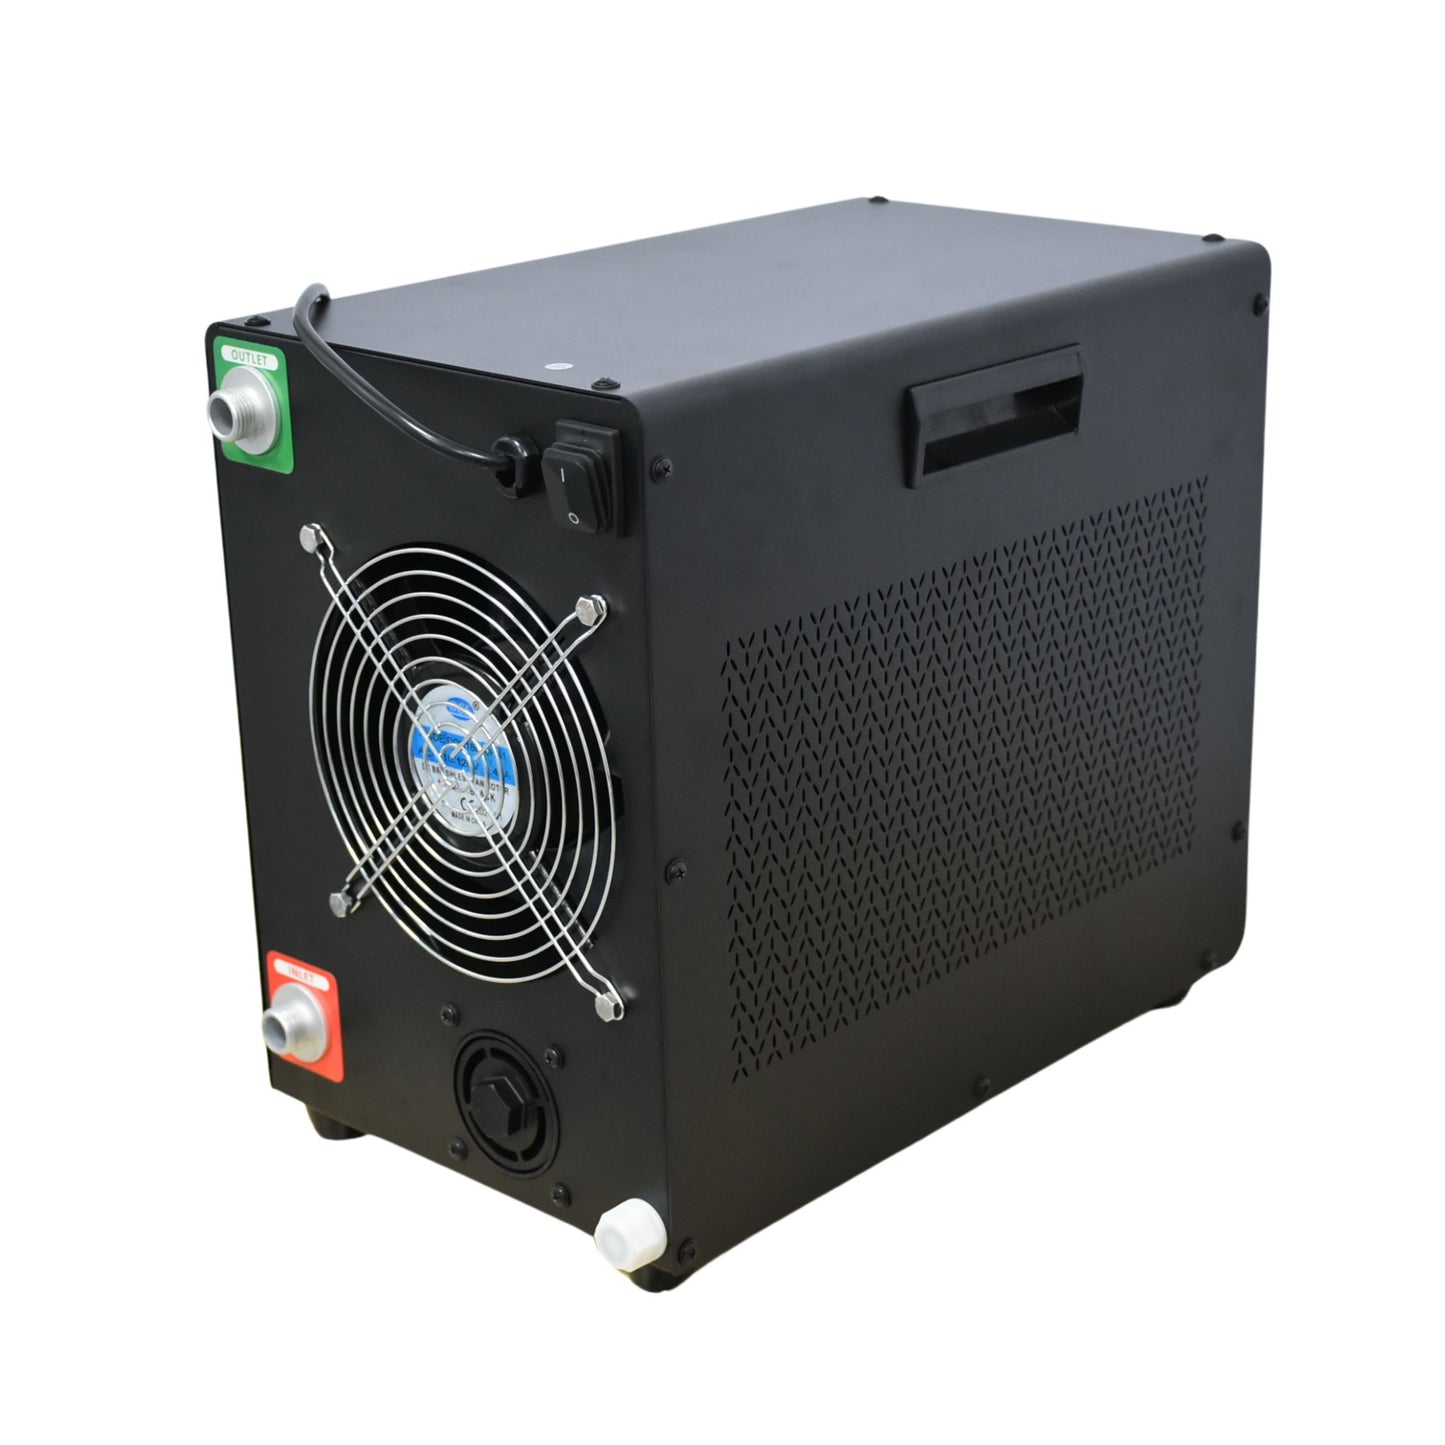 The Compact Chiller